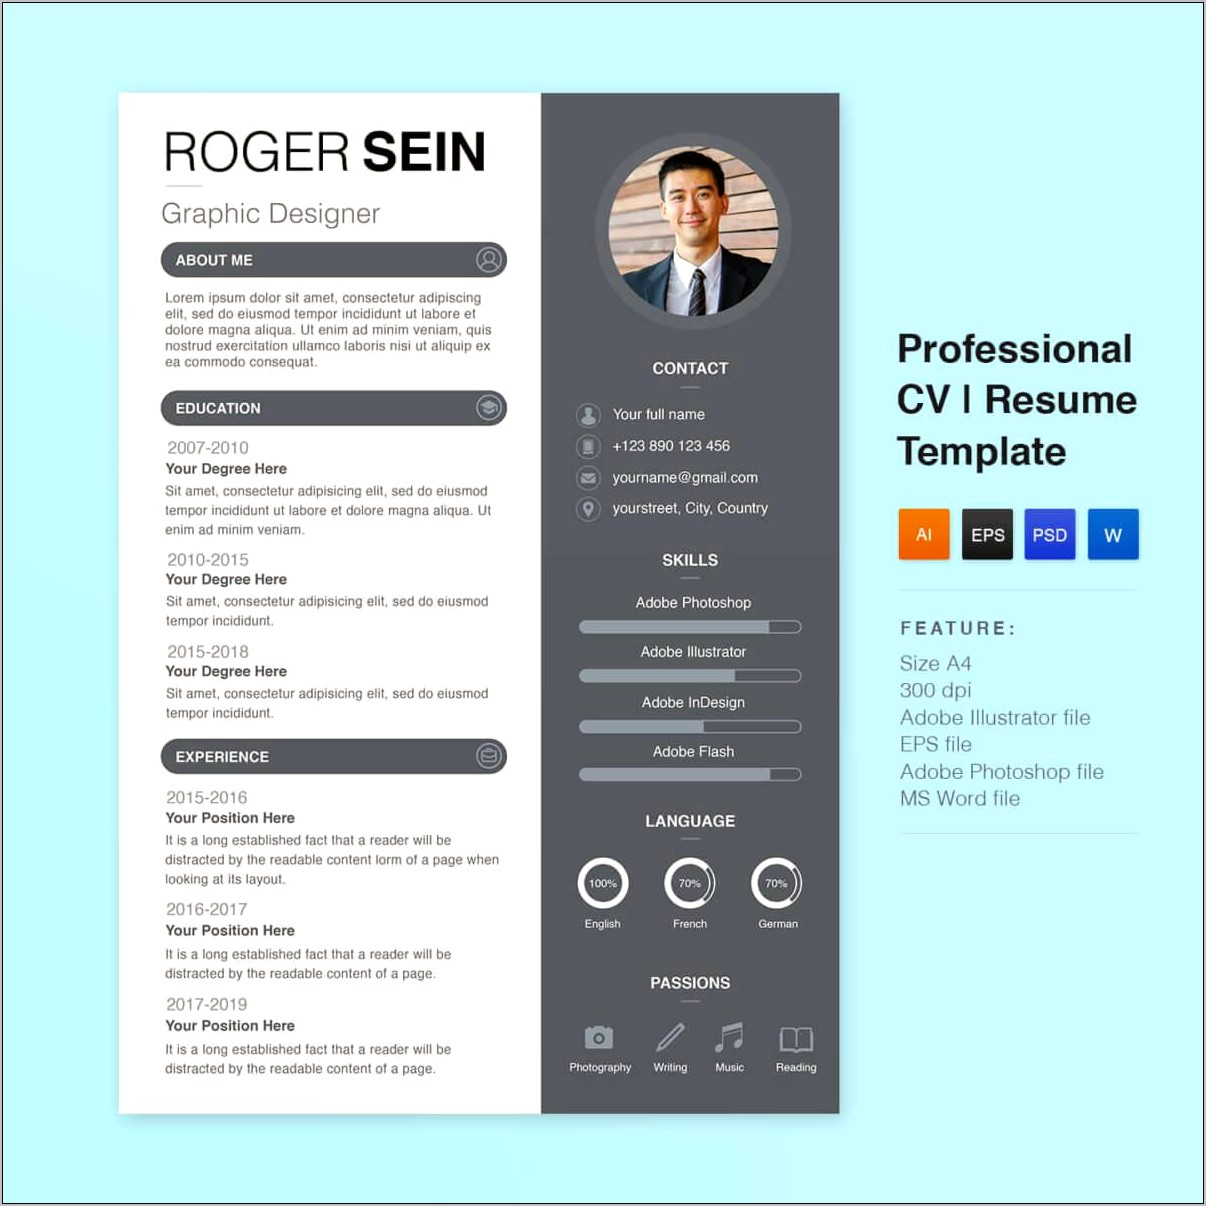 Best Adobe Fonts For Resumes